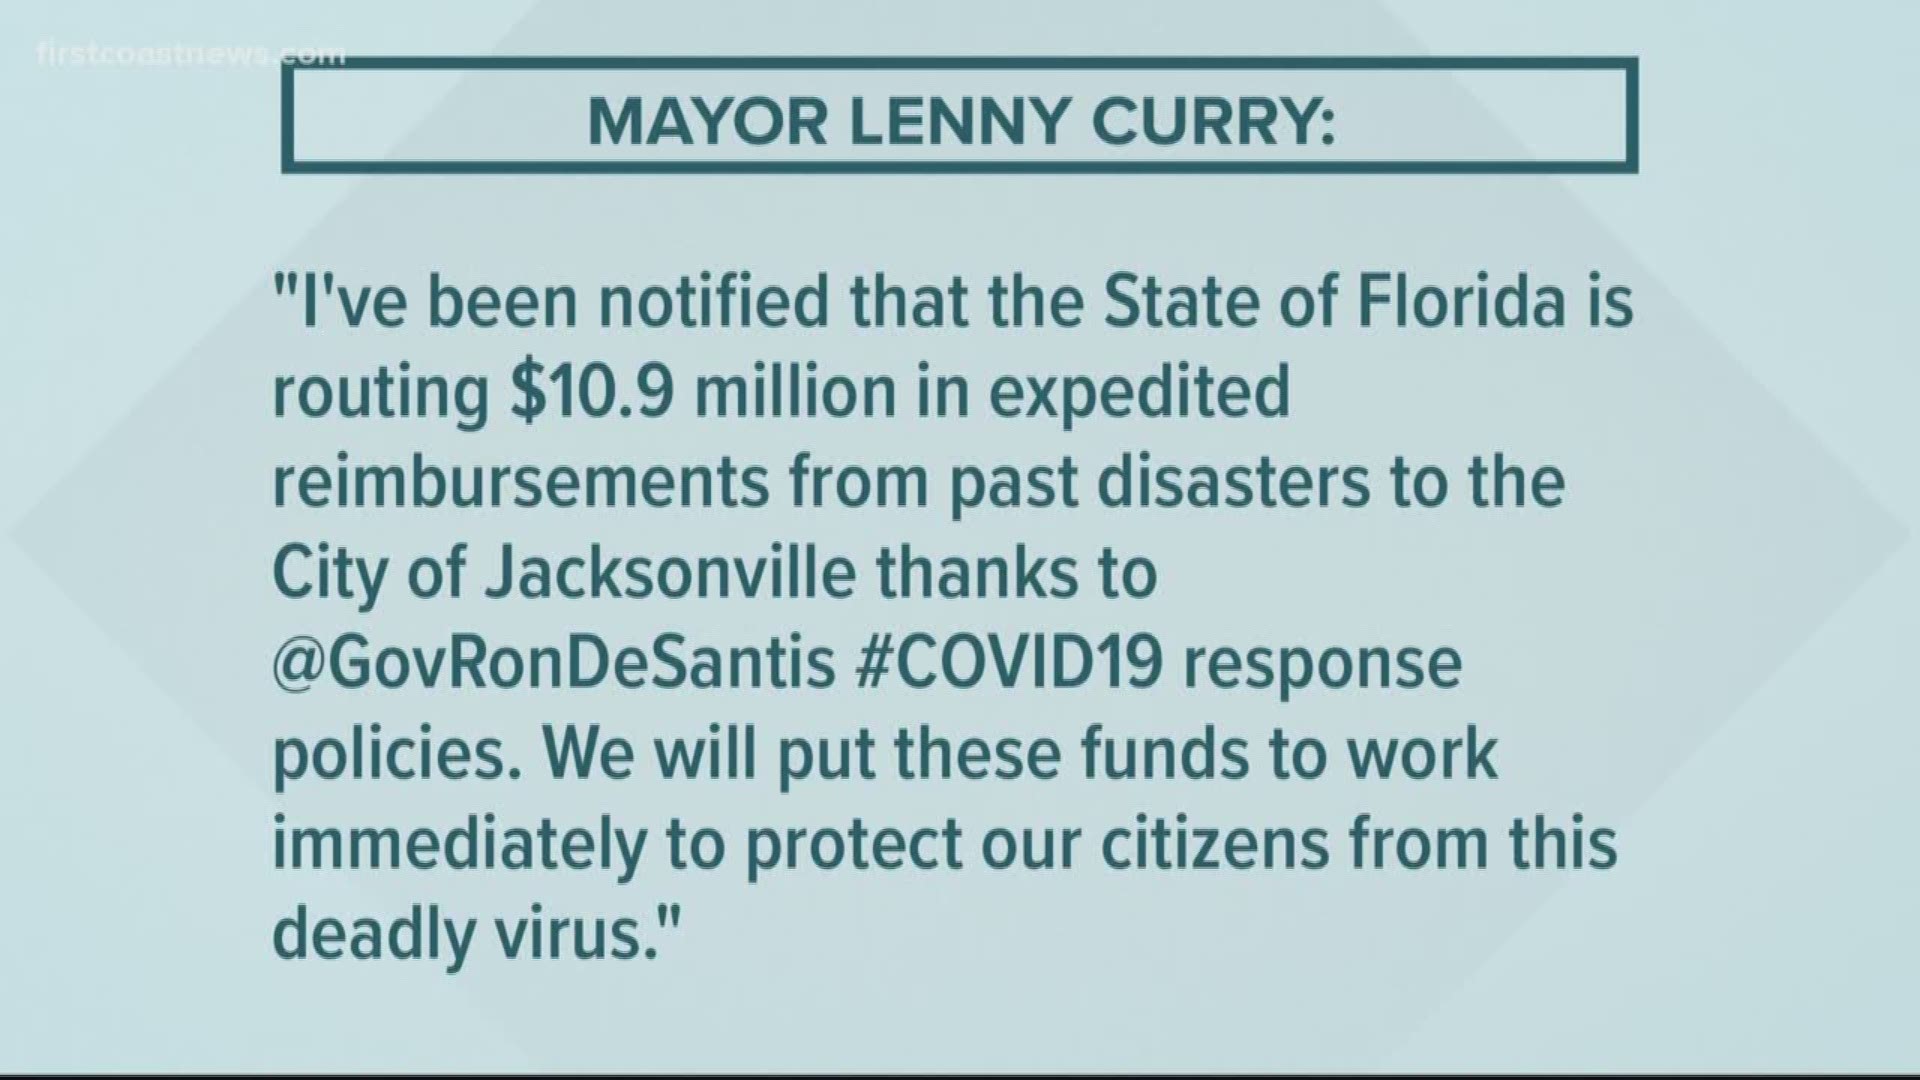 Jacksonville Mayor Lenny Curry said the city is expecting to receive more than $10 million from the state as part of its coronavirus response.